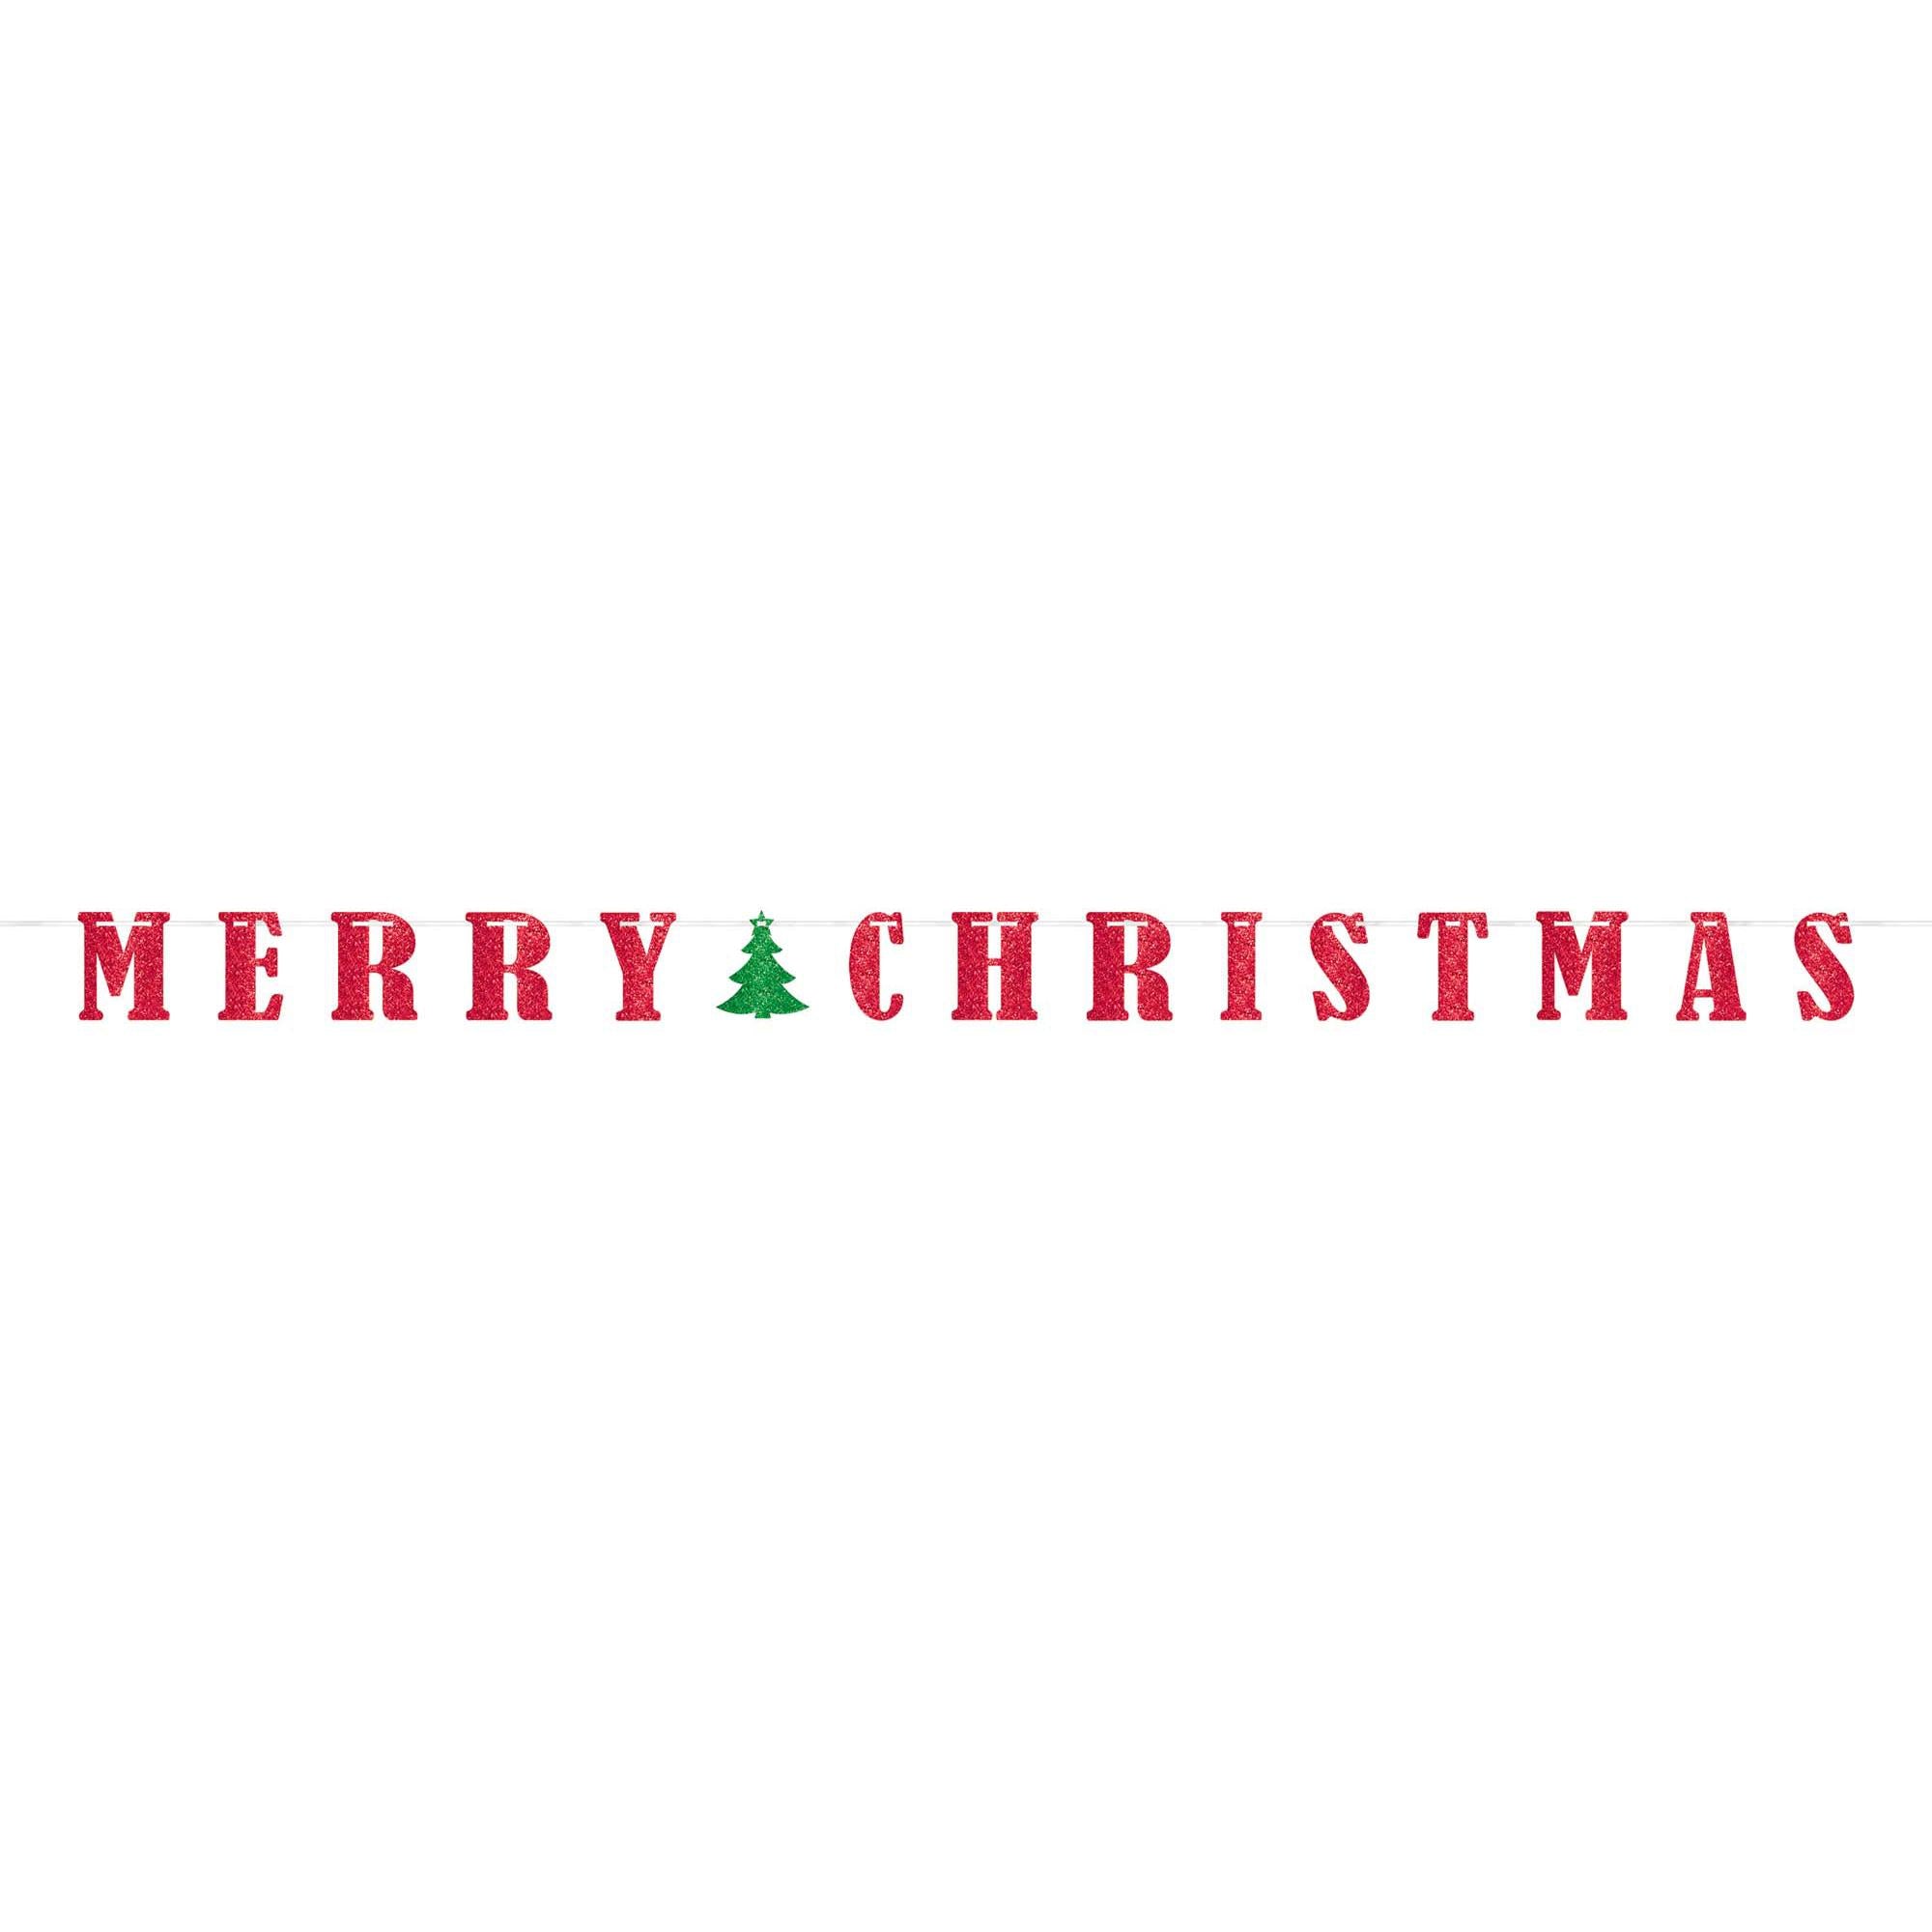 Merry Christmas Glitter Letter Banner Decorations - Party Centre